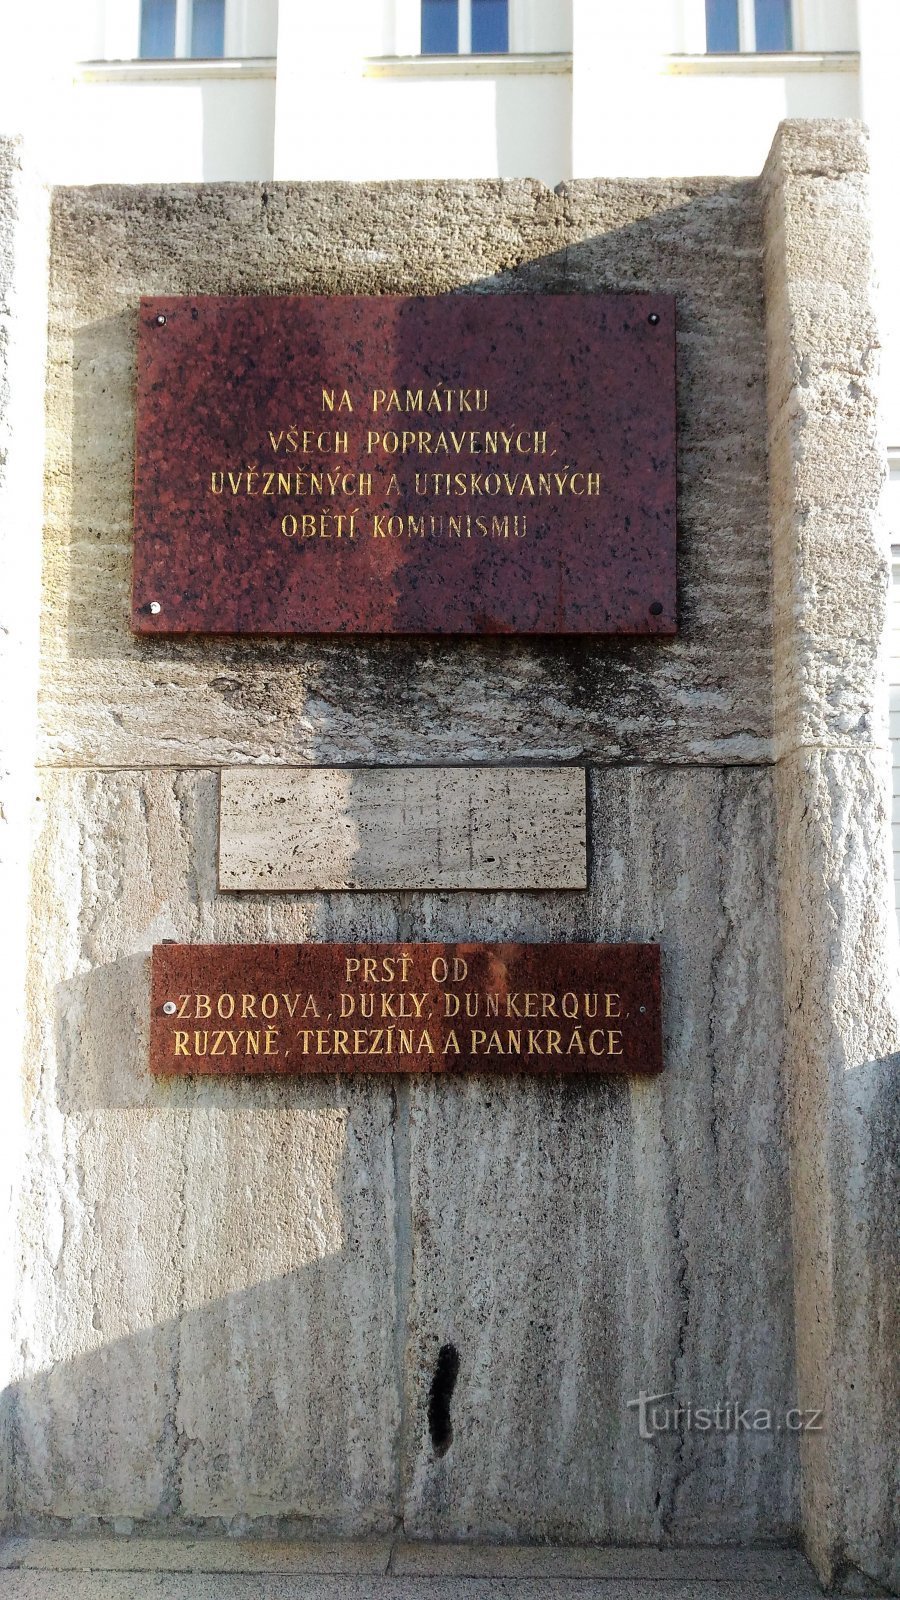 Monument on the staircase in front of the municipality building in Teplice